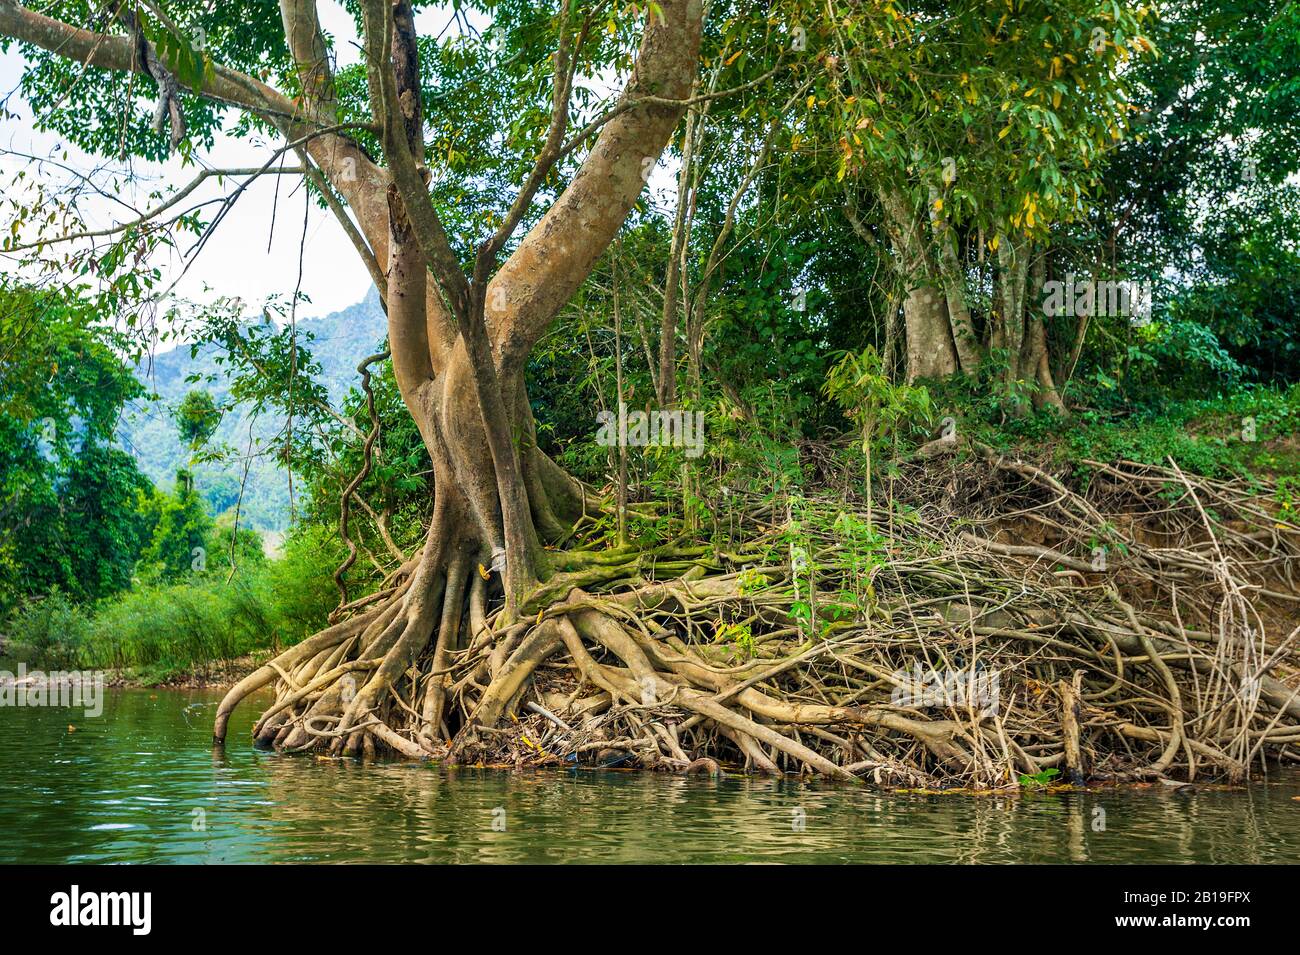 In the mangrove swamps of Thailand Stock Photo